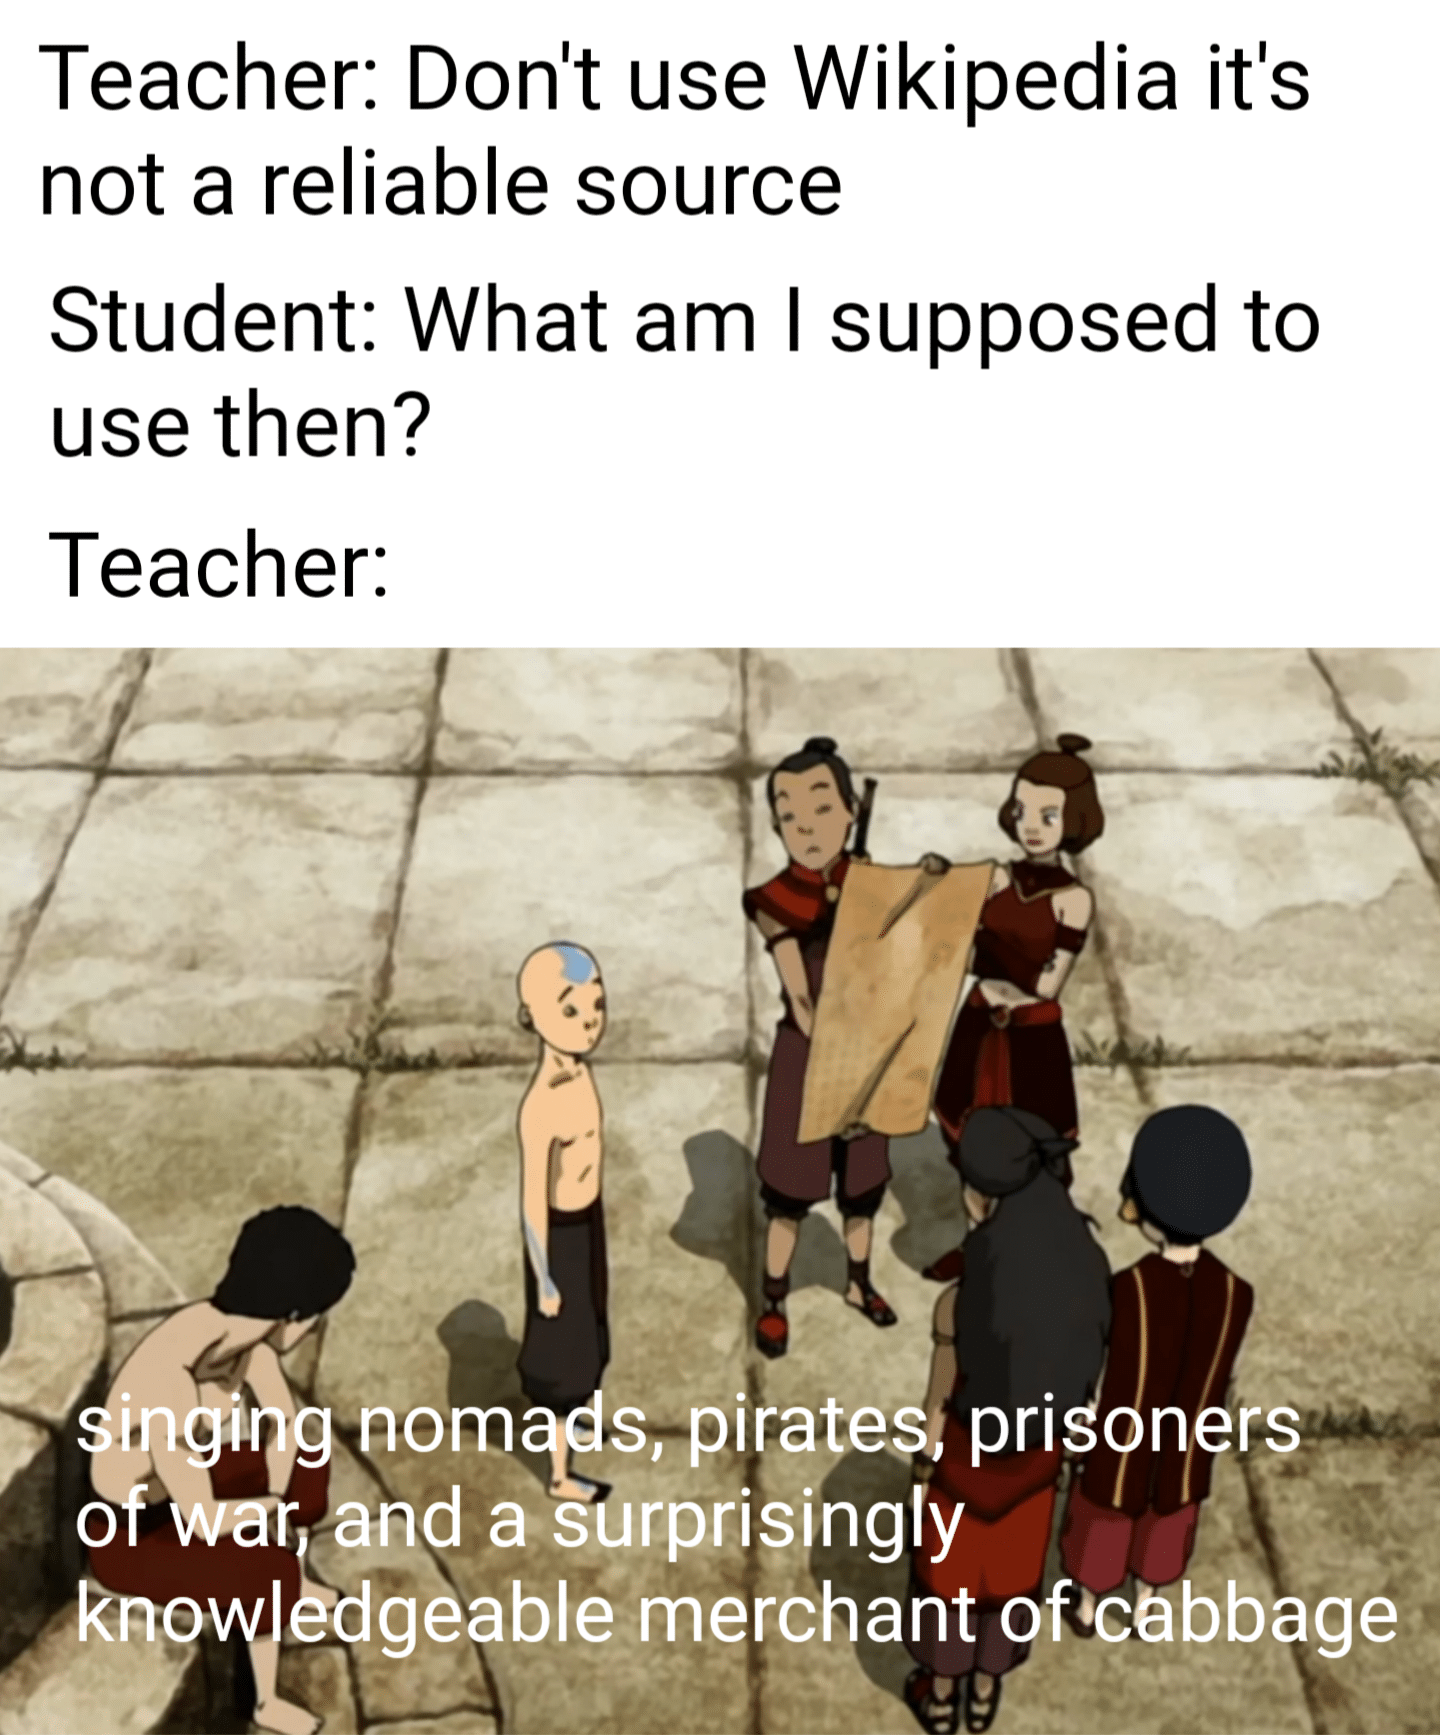 Funny, Cabbage, Wiki, Merchant, ATLA other memes Funny, Cabbage, Wiki, Merchant, ATLA text: Teacher: Don't use Wikipedia it's not a reliable source Student: What am I supposed to use then? Teacher: nd as &G8ablémerc ant fißåbb%ge 